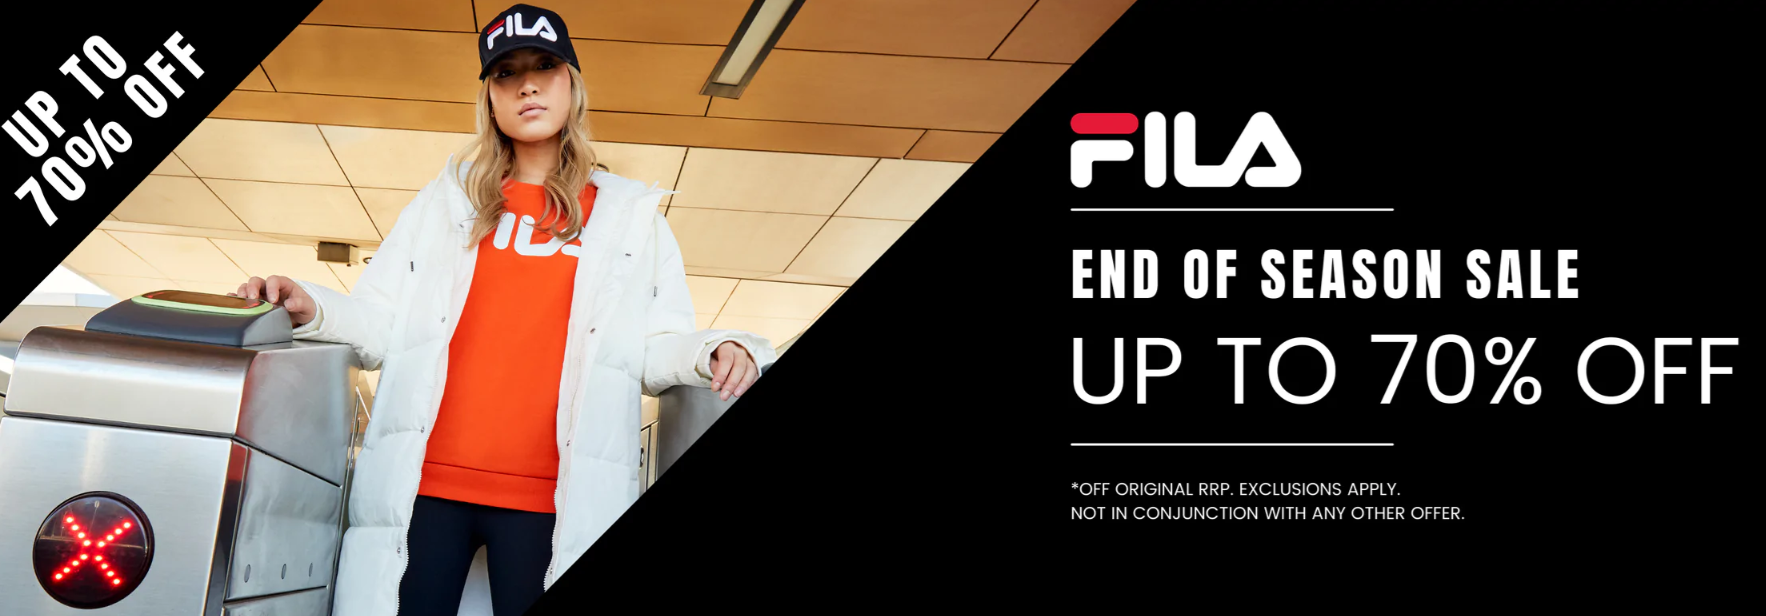 Fila EOFY sale up to 70% OFF on clothing and accessories